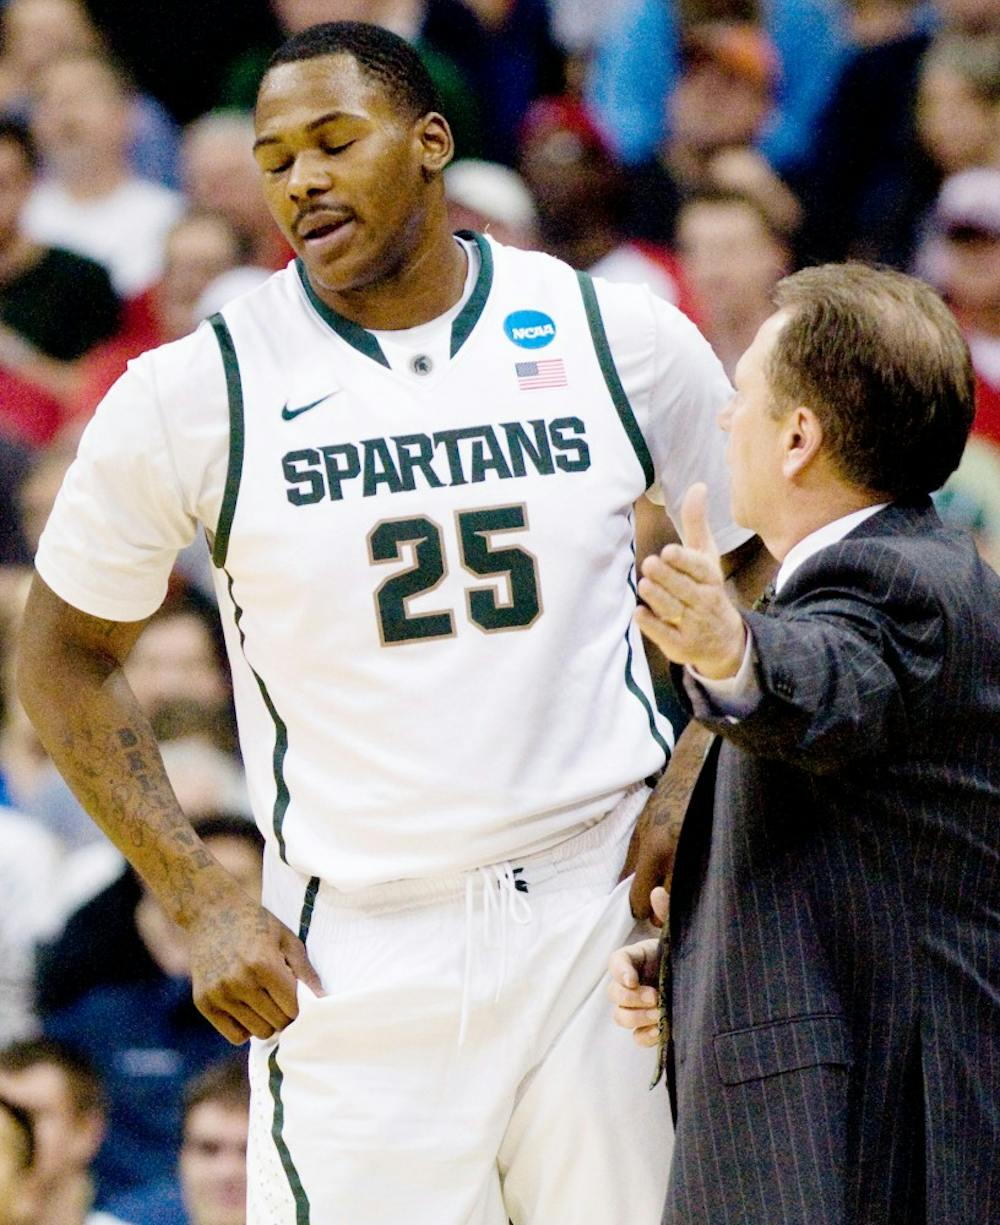 Junior center Derrick Nix receives direction from head coach Tom Izzo Sunday afternoon at Nationwide Arena, Columbus, Ohio. Nix had three turnovers in the 65-61 Spartan victory over the St. Louis Billikens. Jaclyn McNeal/The State News. 